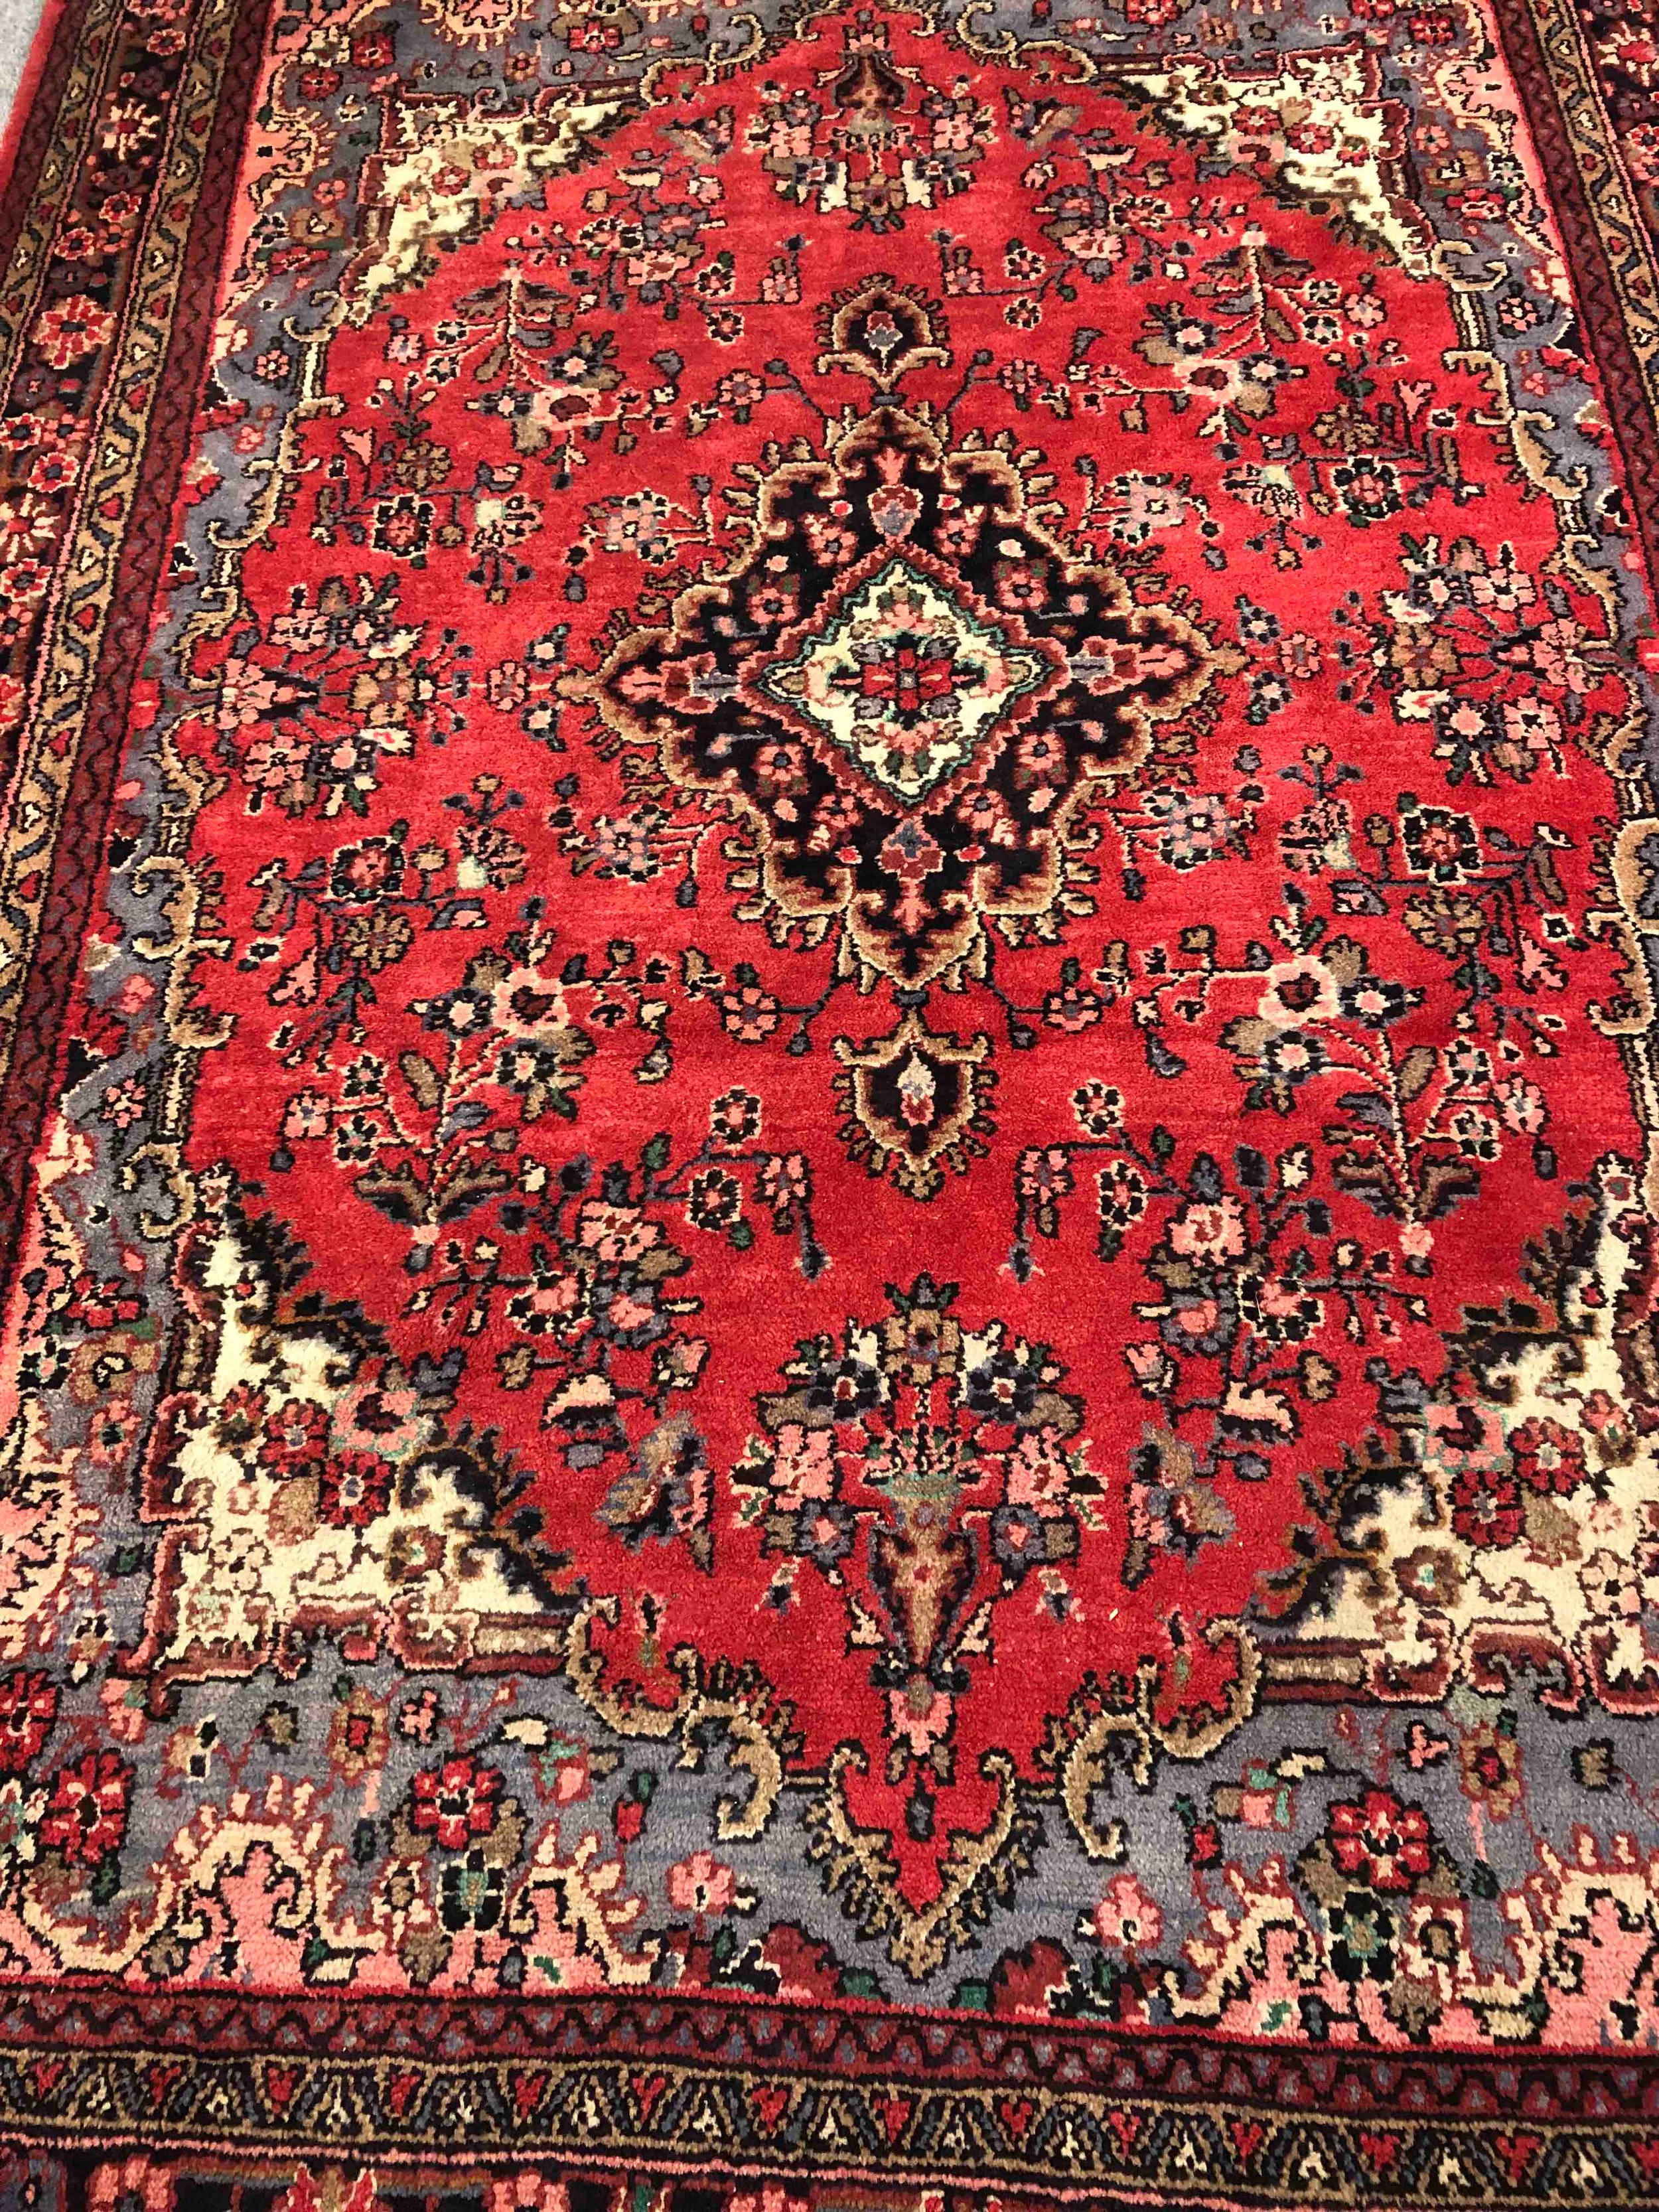 A Persian Sarouk carpet with central medallion and flowerhead motifs across the burgundy field - Image 2 of 3